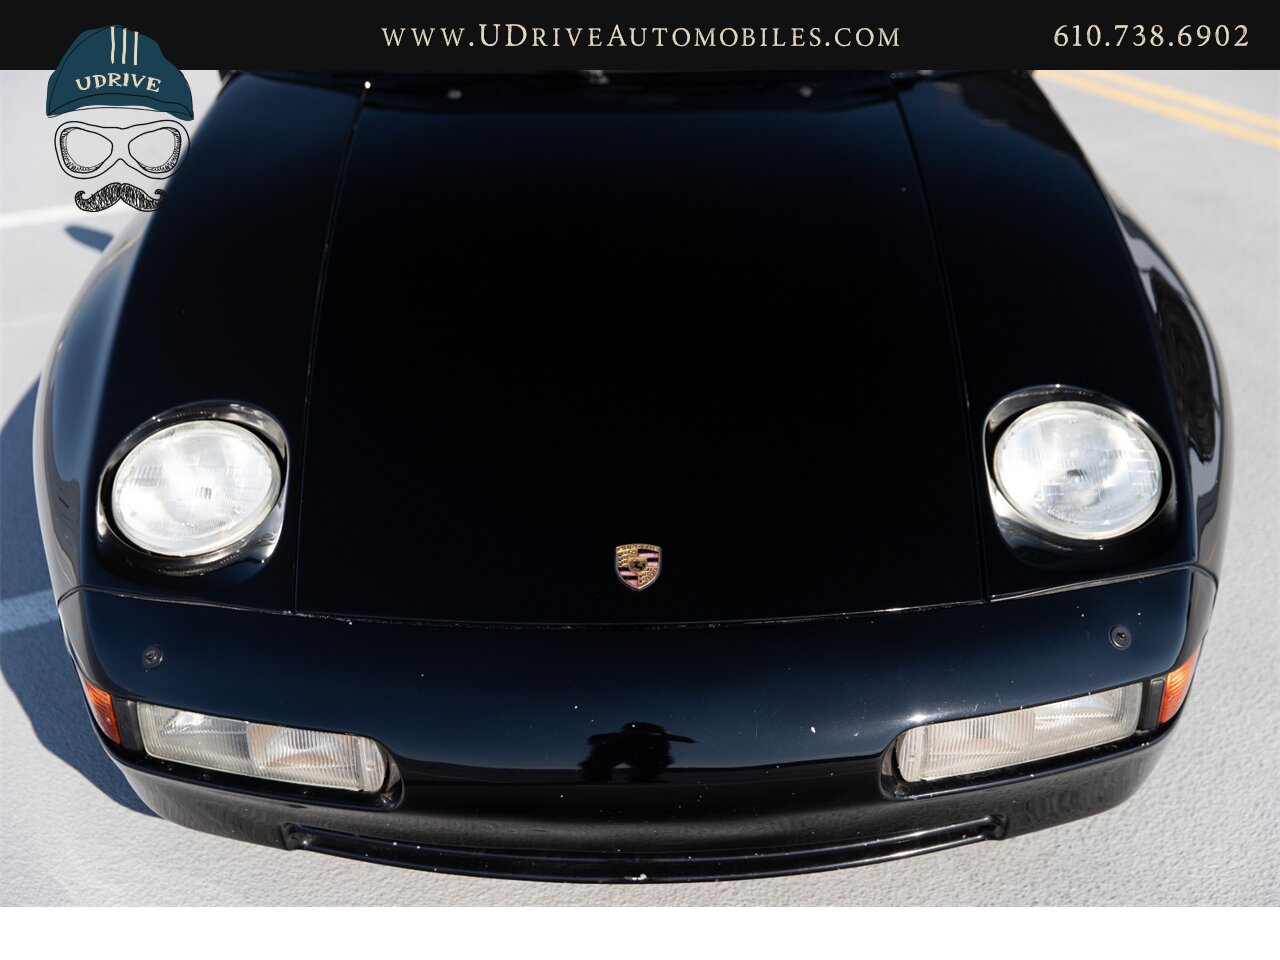 1990 Porsche 928 S4 $58k in Service History Since 2014   - Photo 10 - West Chester, PA 19382